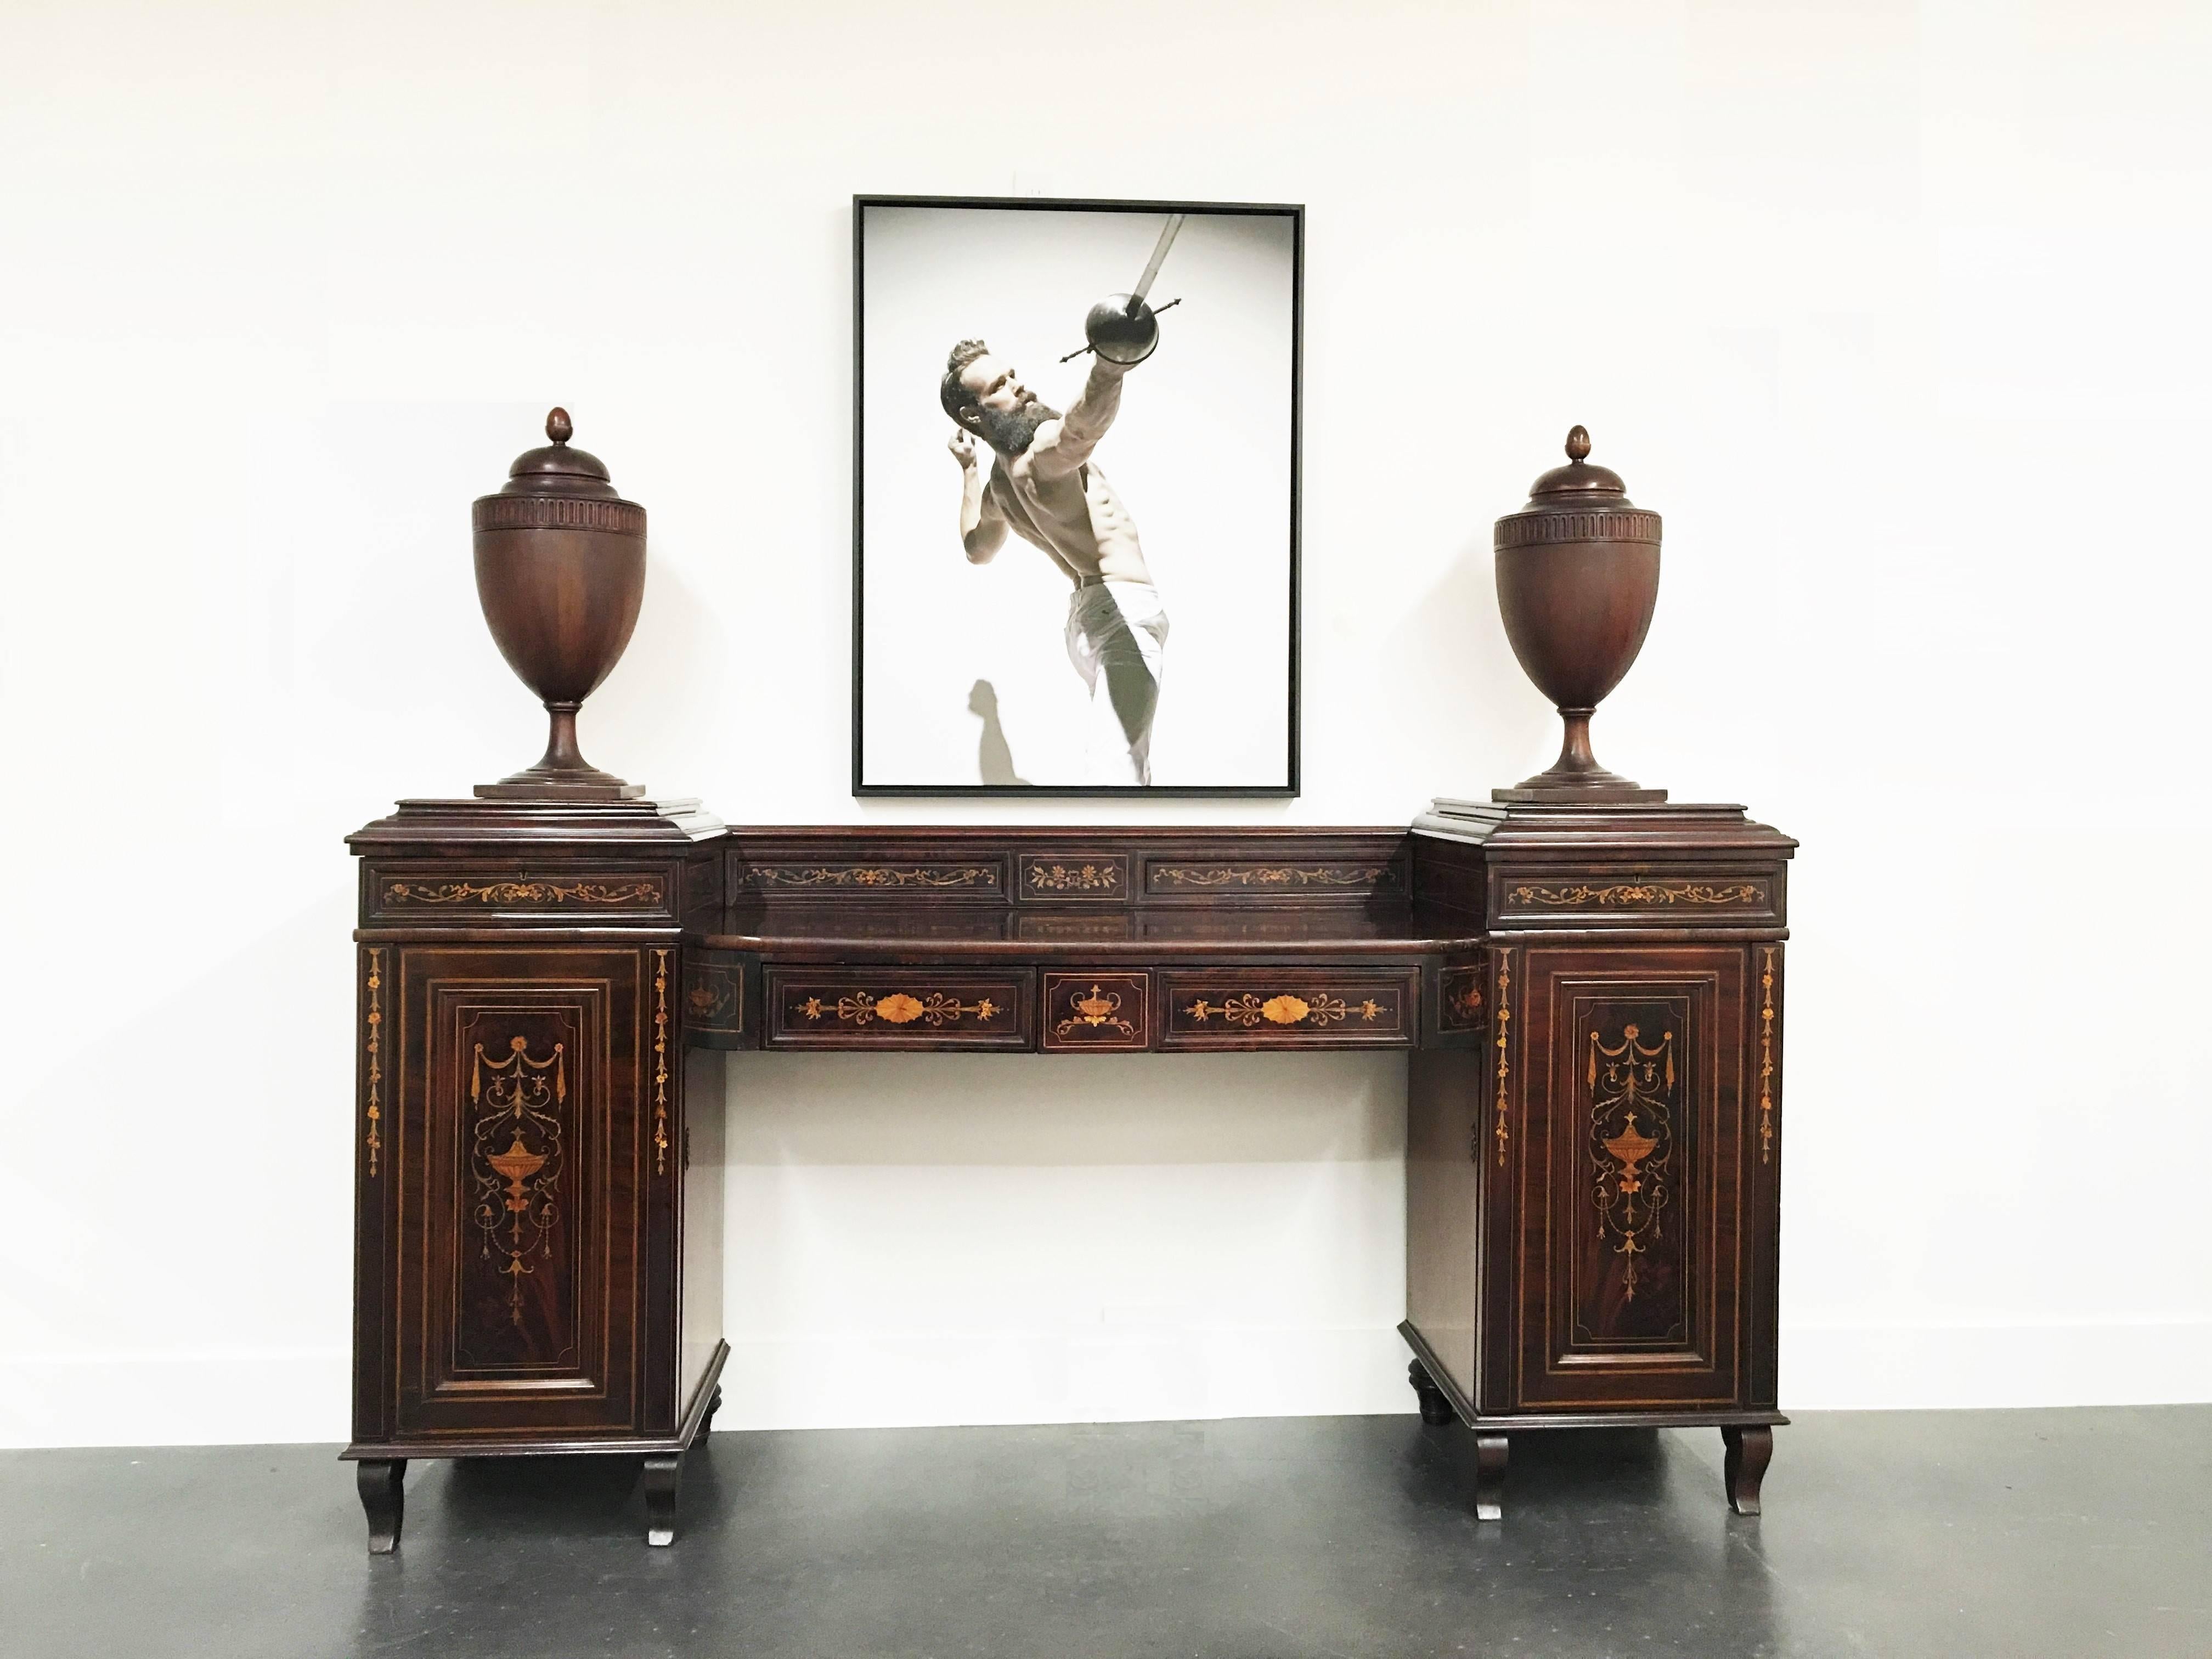 Decorated throughout with fine quality marquetry of pale woods inset into a contrasting rosewood ground showing floral arrangements, vases and garlands. The sideboard comprises a pedestal cupboard at each end topped by a resplendent cutlery urn, the